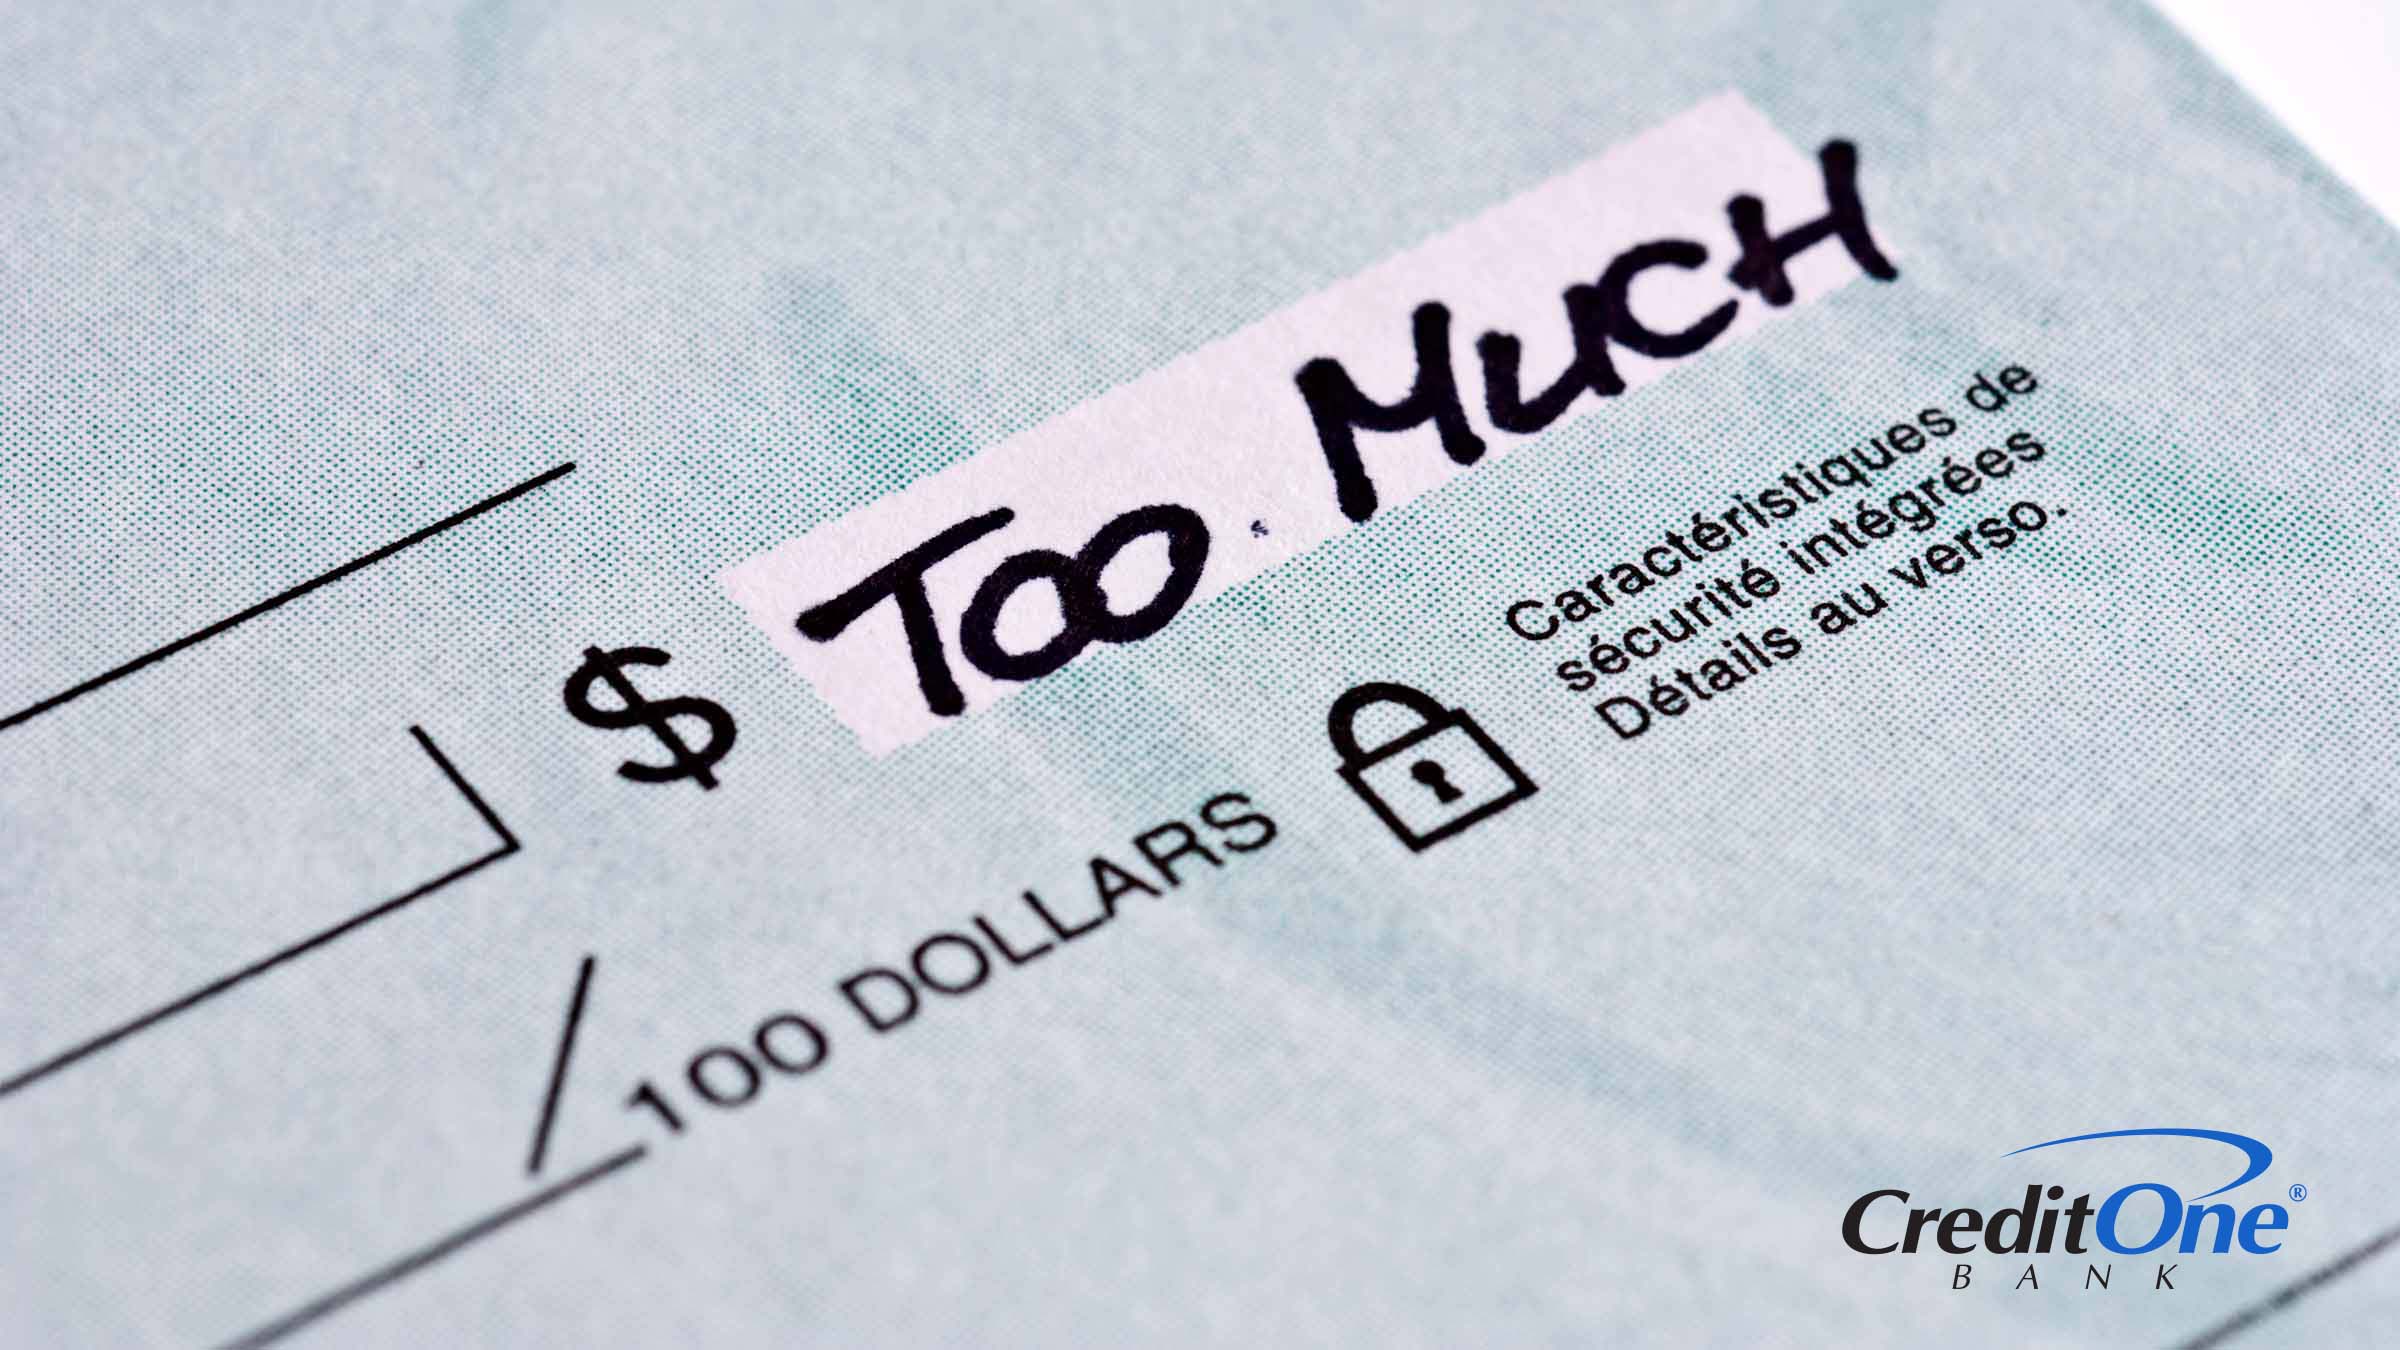 A check shows “too much” in the amount field, indicating a red flag in a money mule scam.